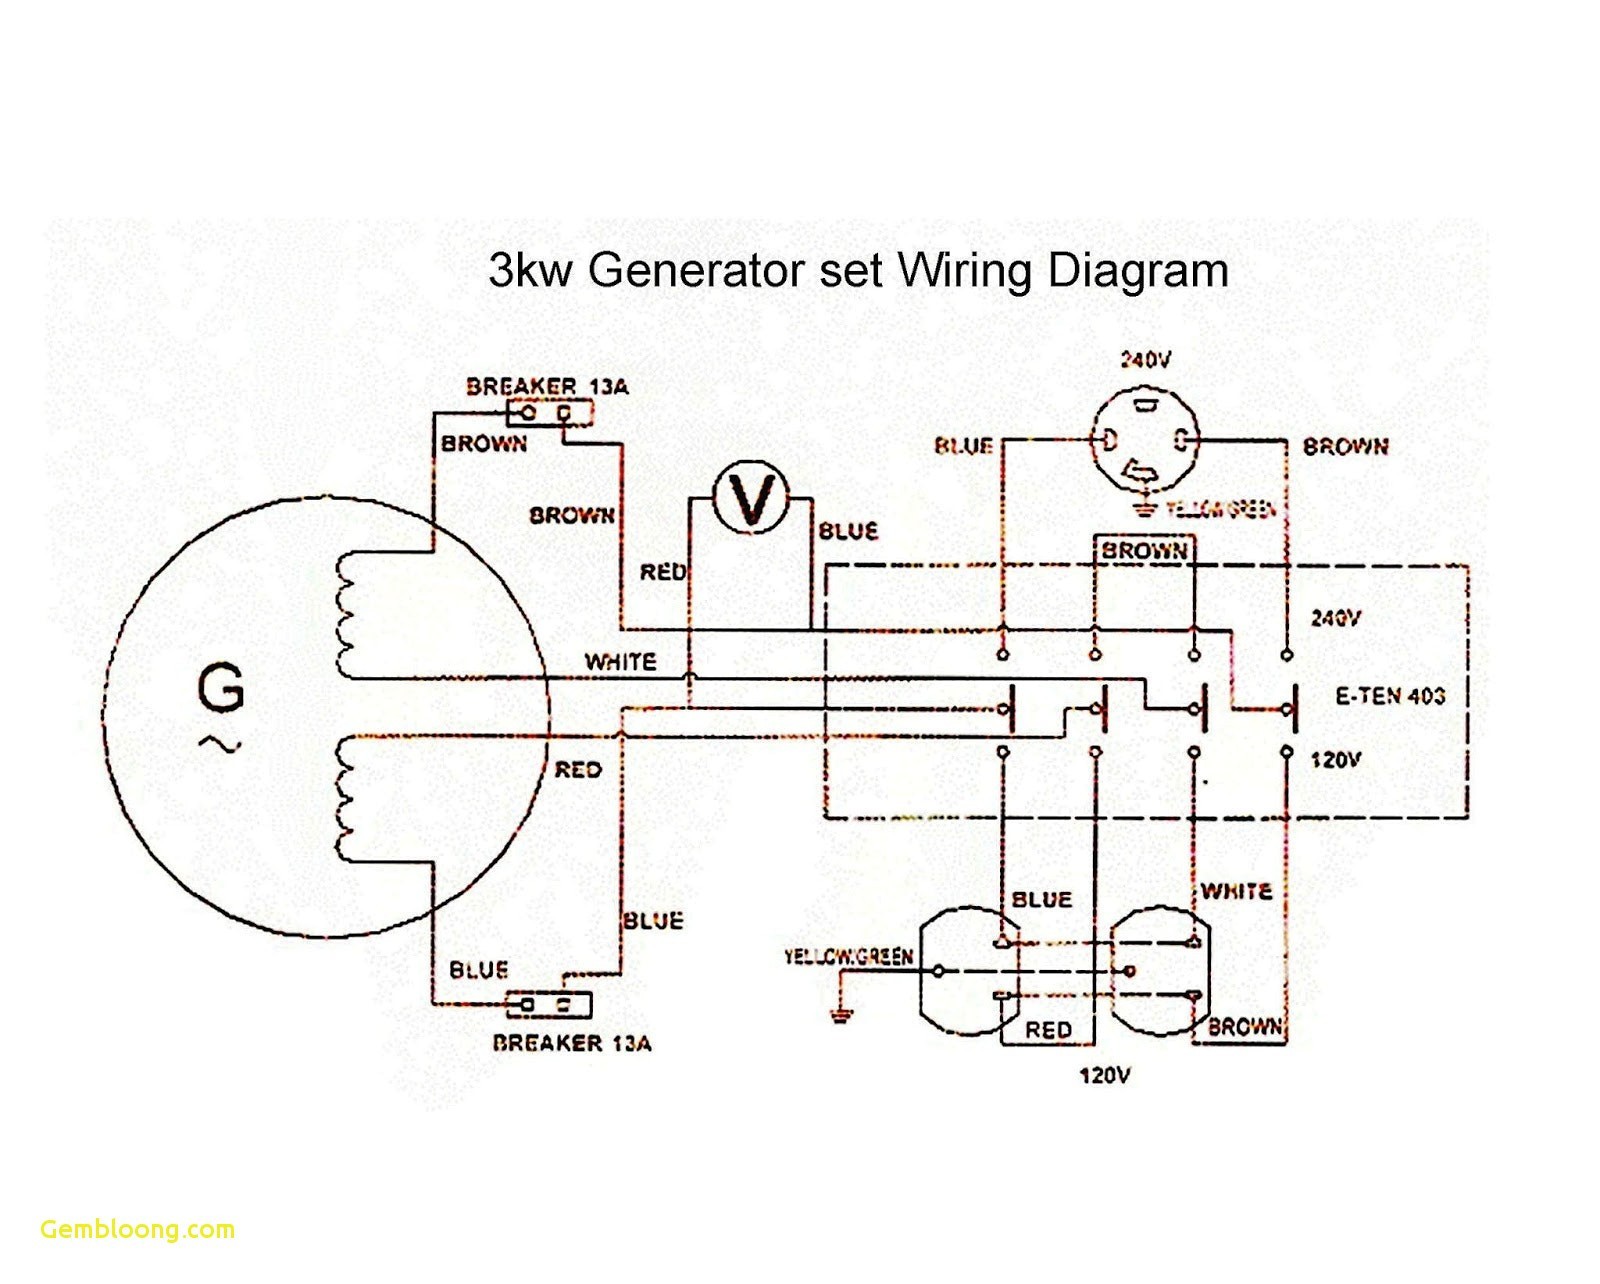 Wiring Diagram Ac Generator Valid Modern Dc Wiring Gallery Schematic Diagram and Wiring Boat and